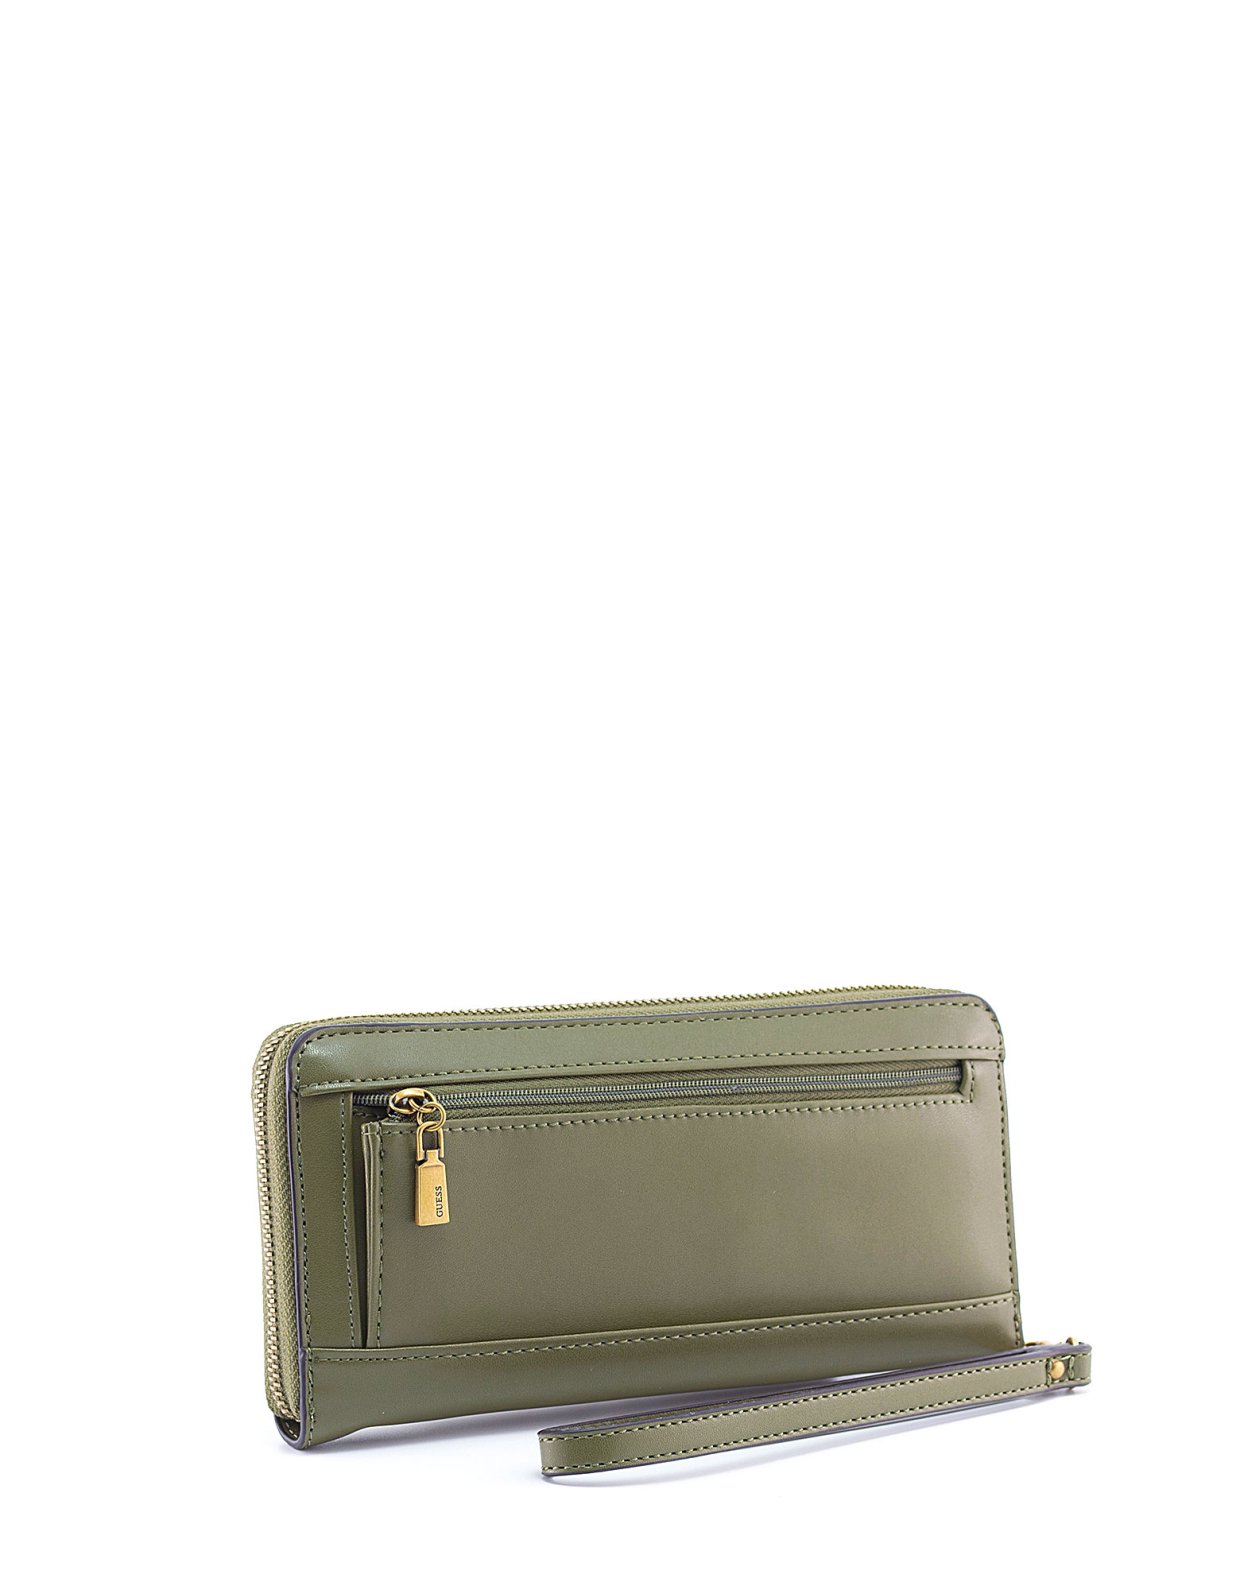 Guess Atene maxi wallet olive